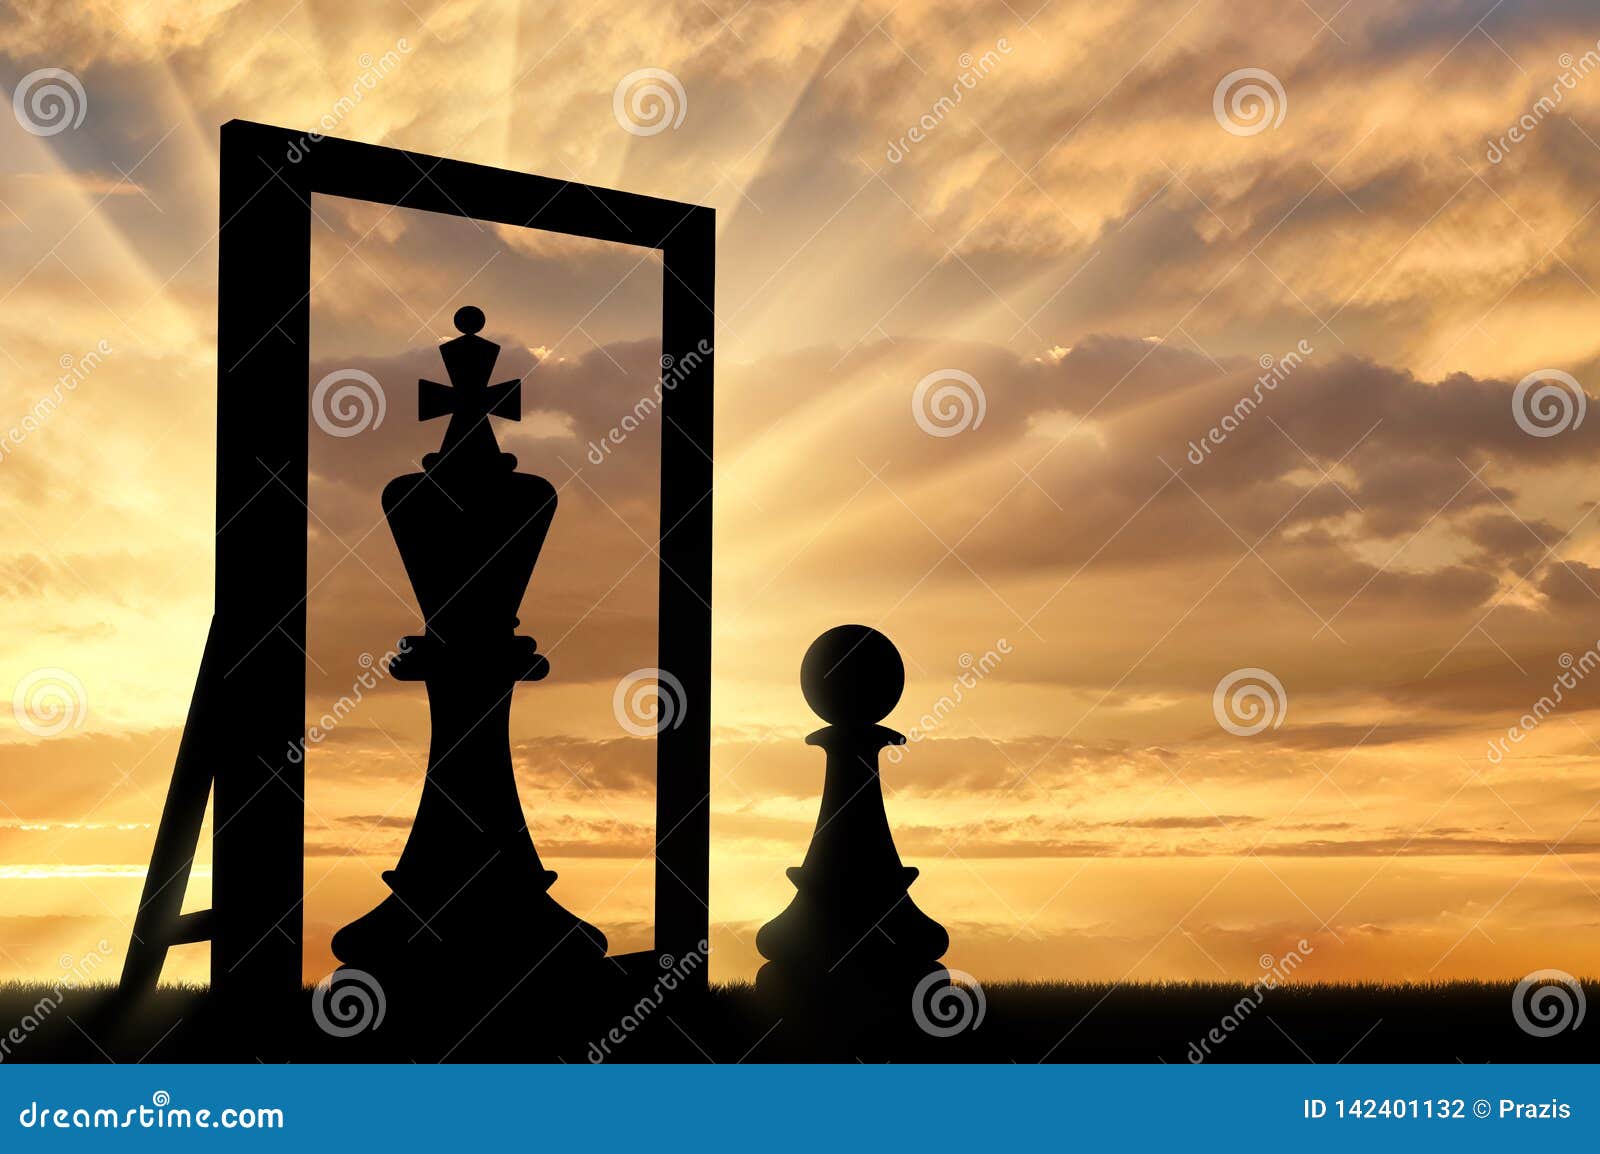 silhouette of a pawn, sees himself in the reflection of the mirror queen